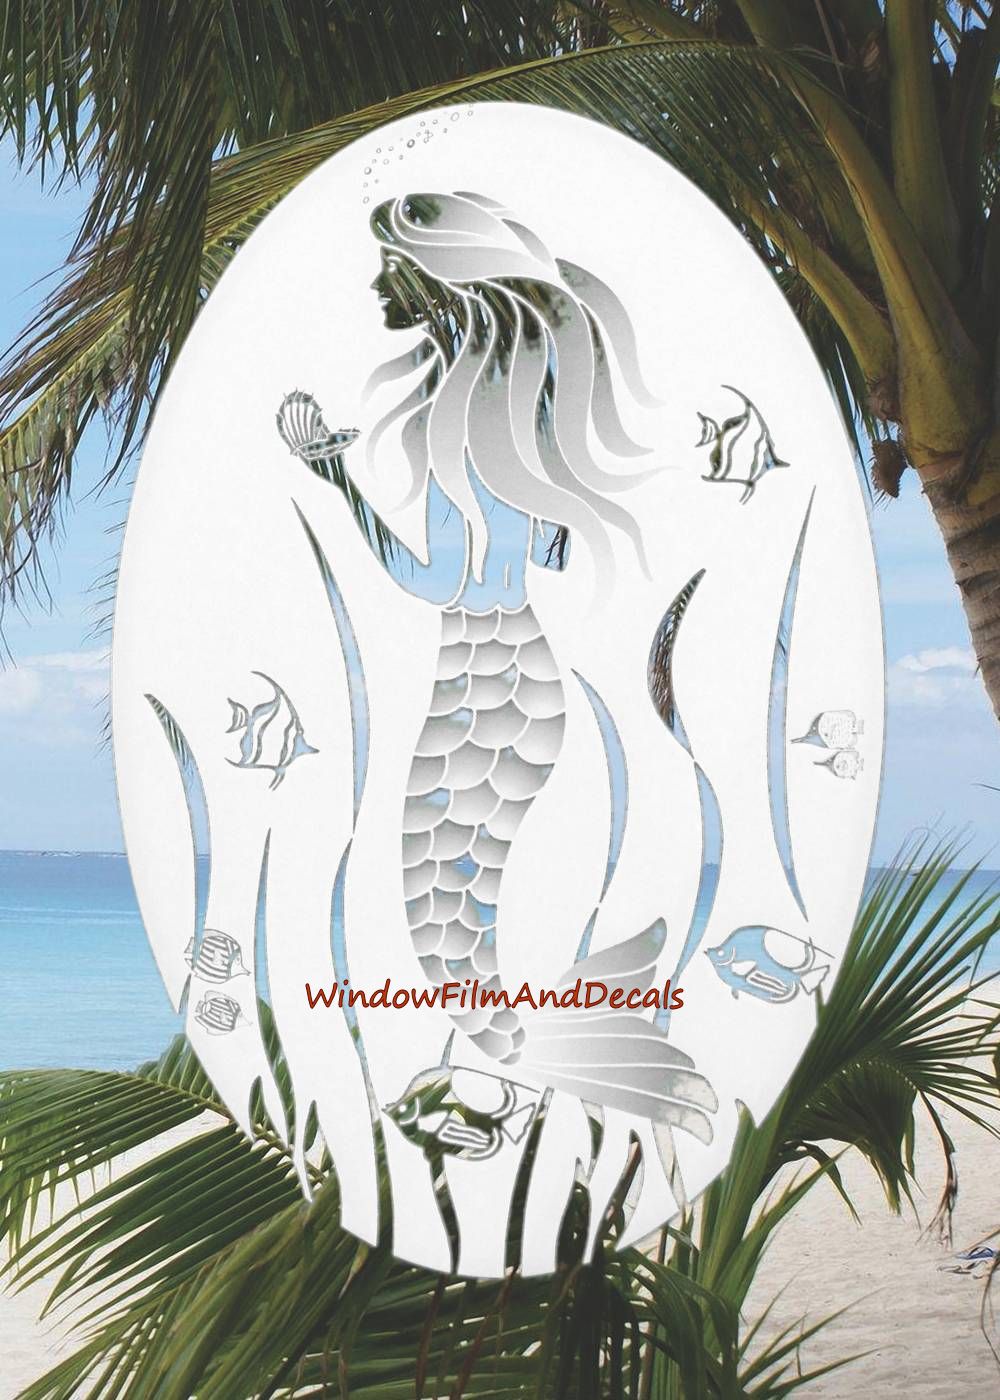 Mermaid Oval Static Cling Window Decal - White w/ Clear Design